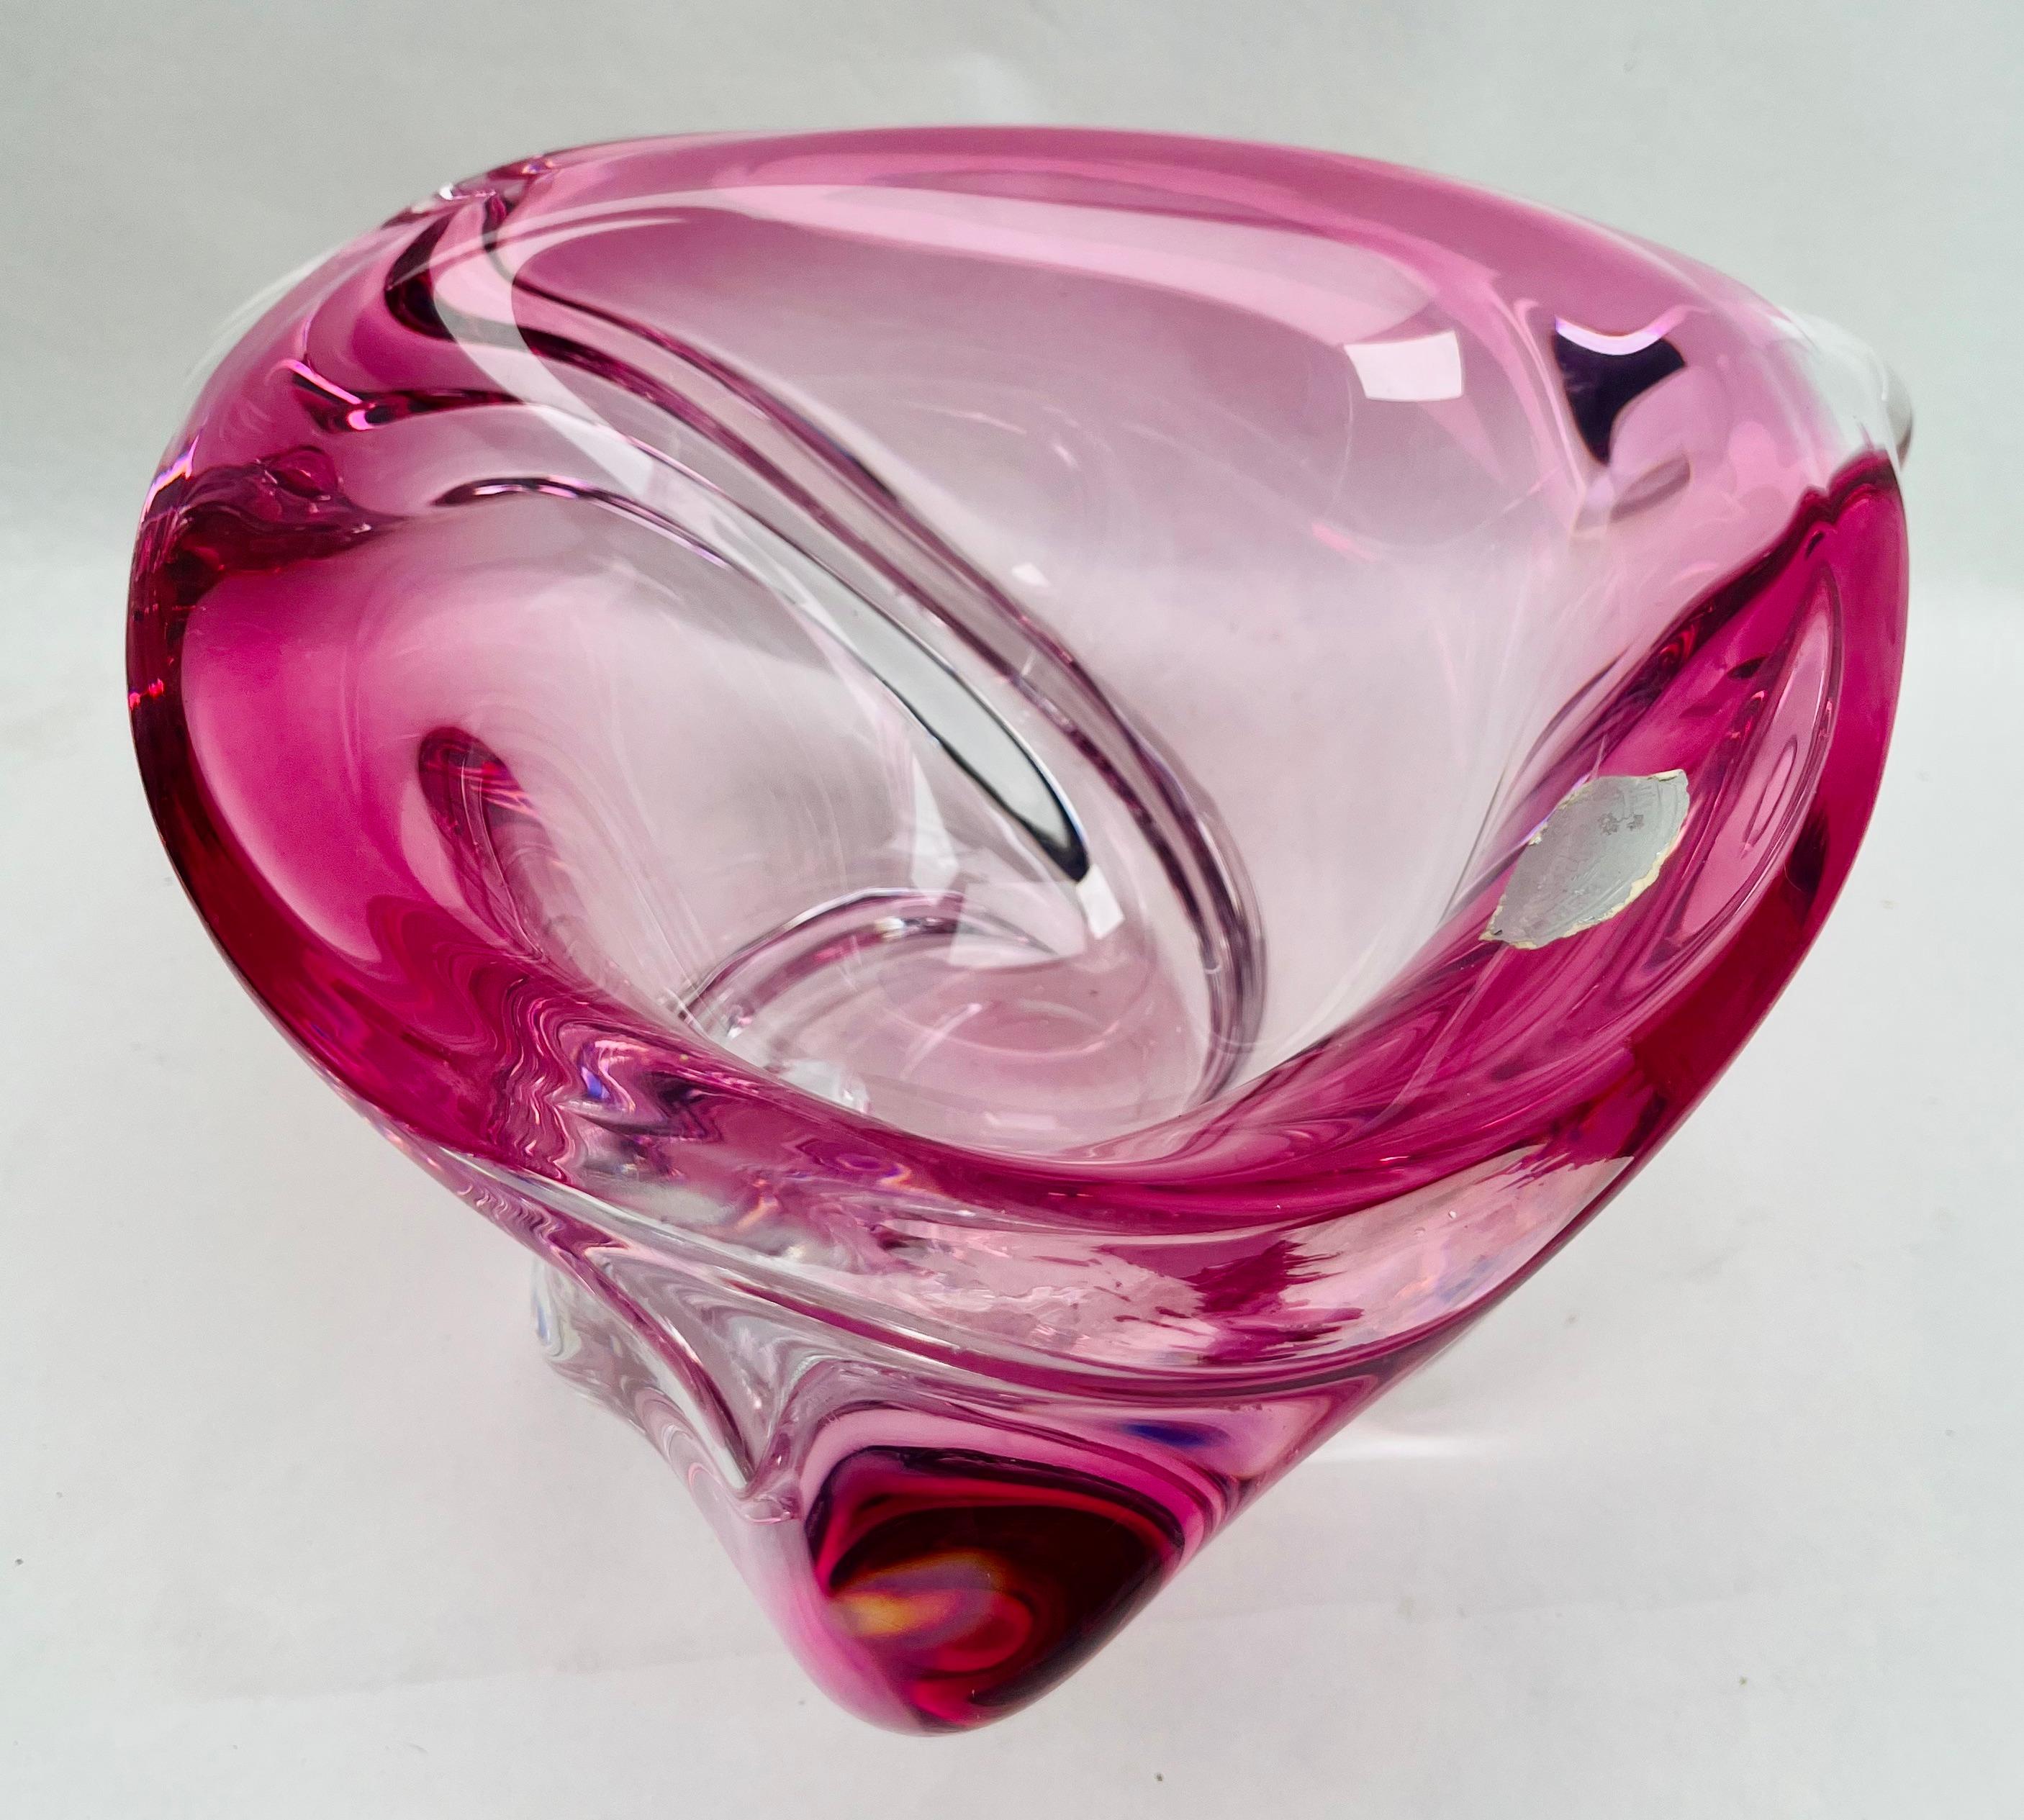 Mid-20th Century Val Saint Lambert Label Sculpted Crystal Vase with Sommerso Core, Belgium For Sale